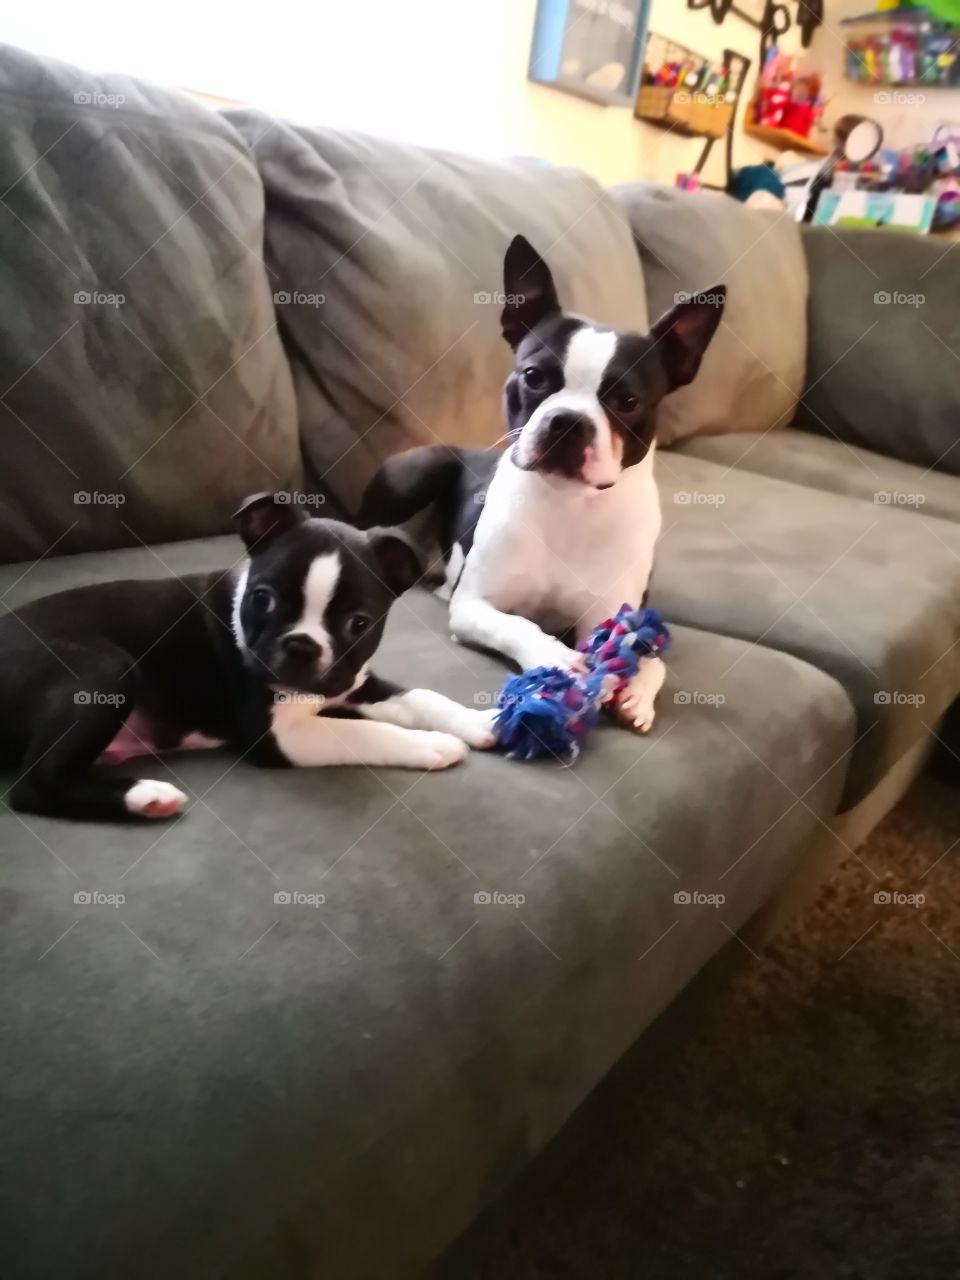 ace and bozo the Boston Terrier besties just felt on the couch checking out their new toy and playing tug a war on and off.